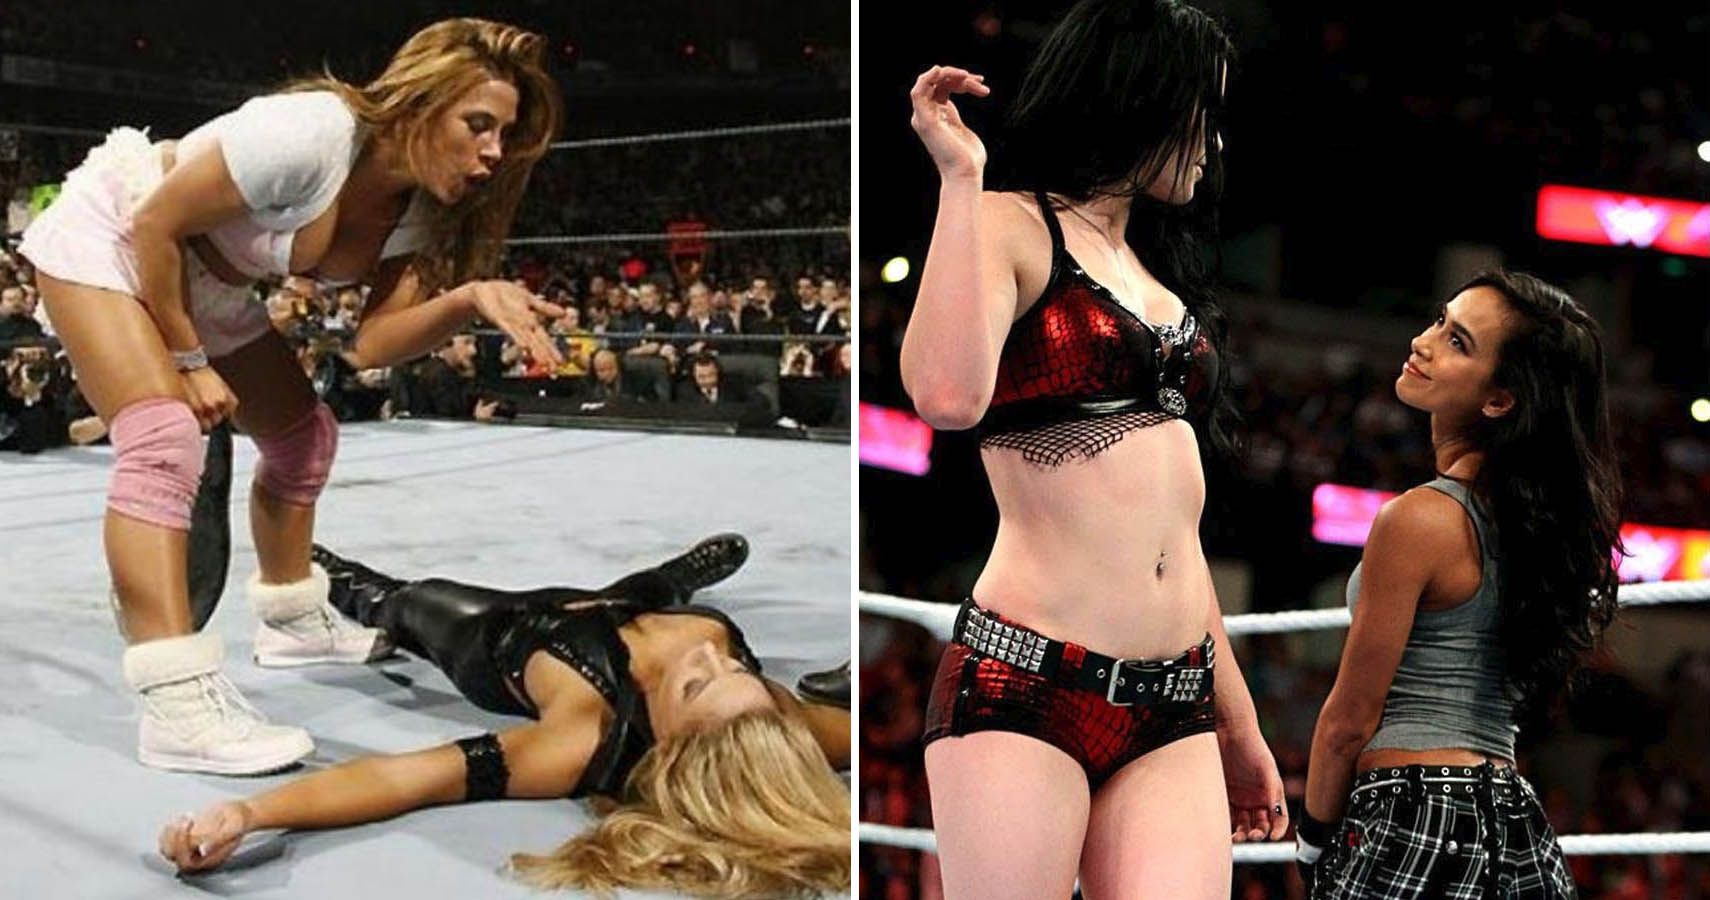 Lesbians Ravage Each Other In Sexy Wrestling